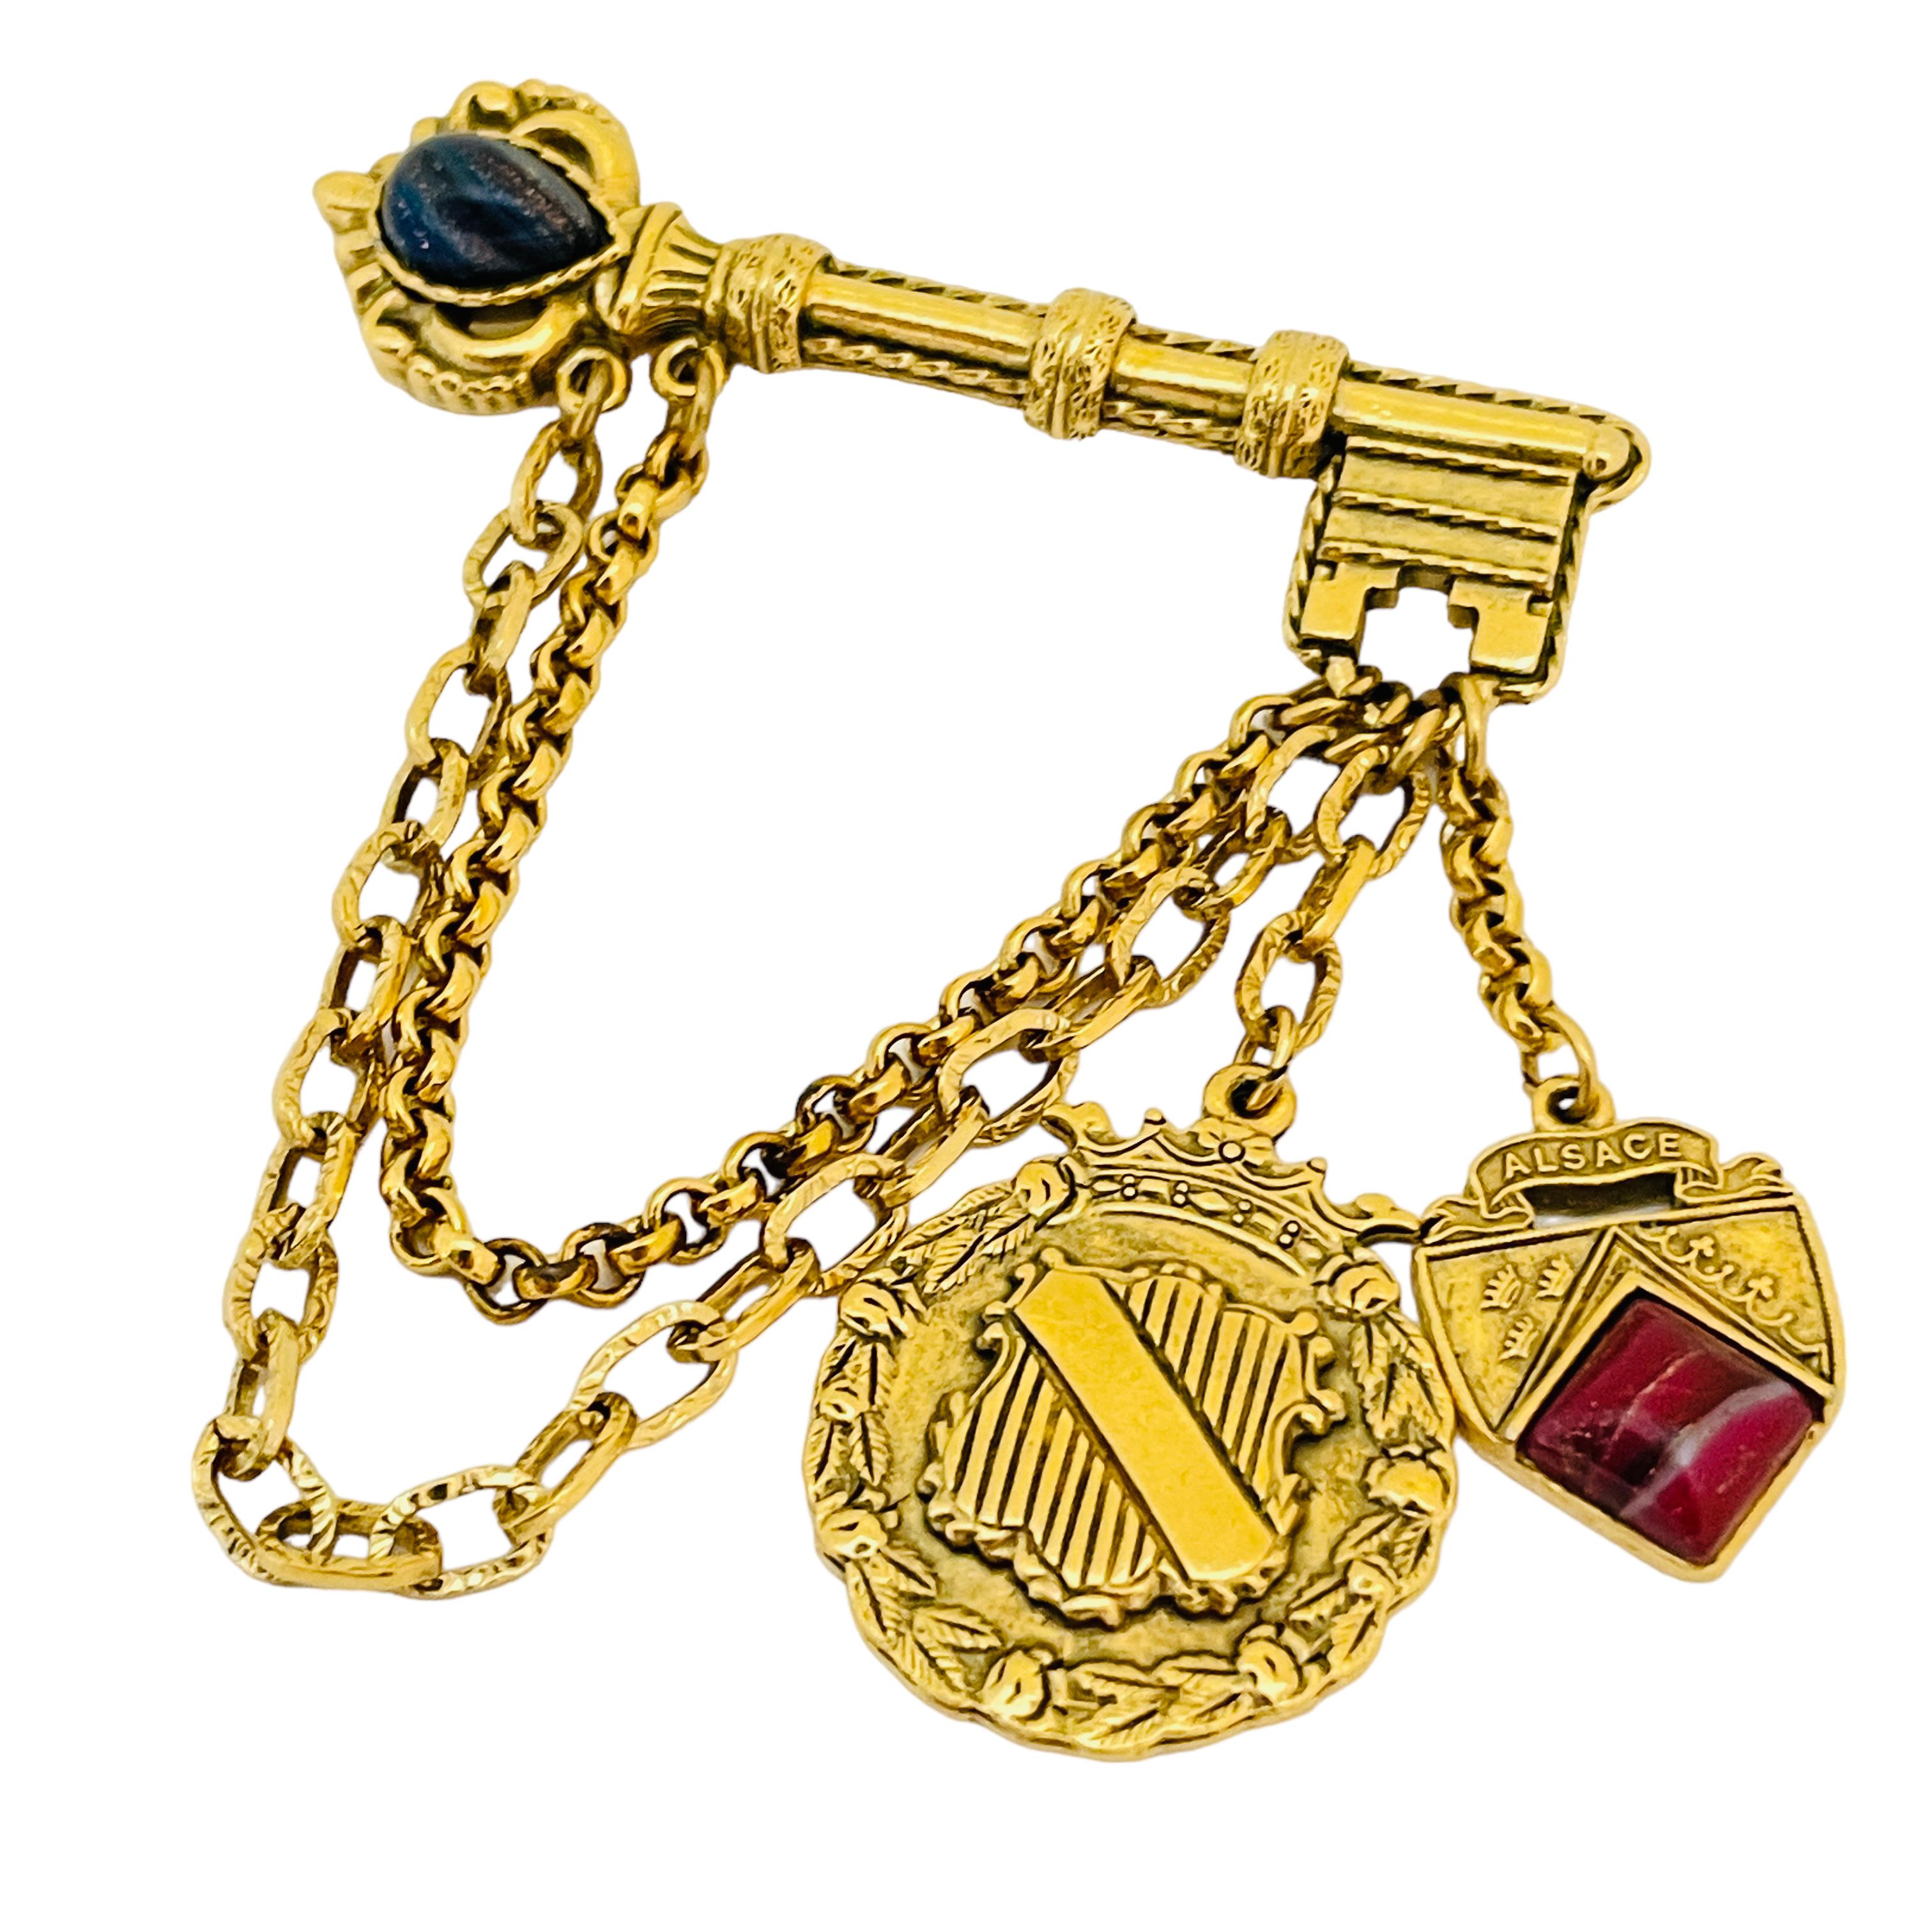 Vintage gold key dangle chain charm brooch In Good Condition For Sale In Palos Hills, IL